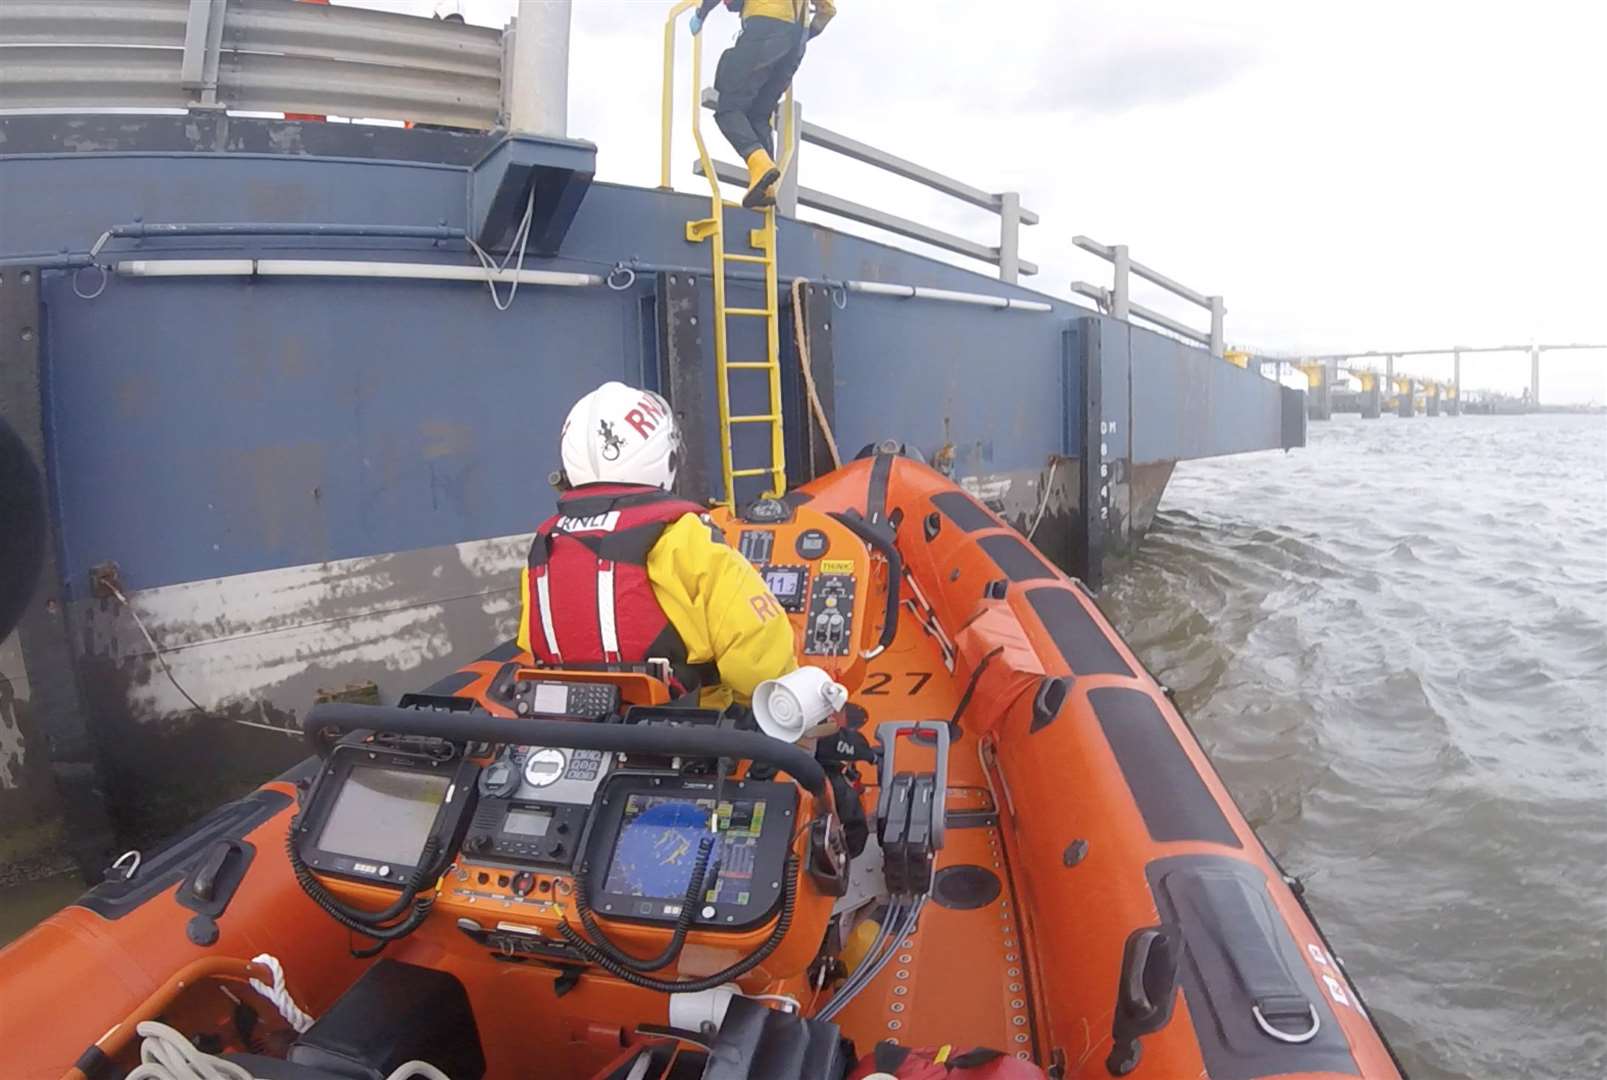 The Gravesend lifeboat crew gained access to the ship by climbing off the lifeboat onto a ladder